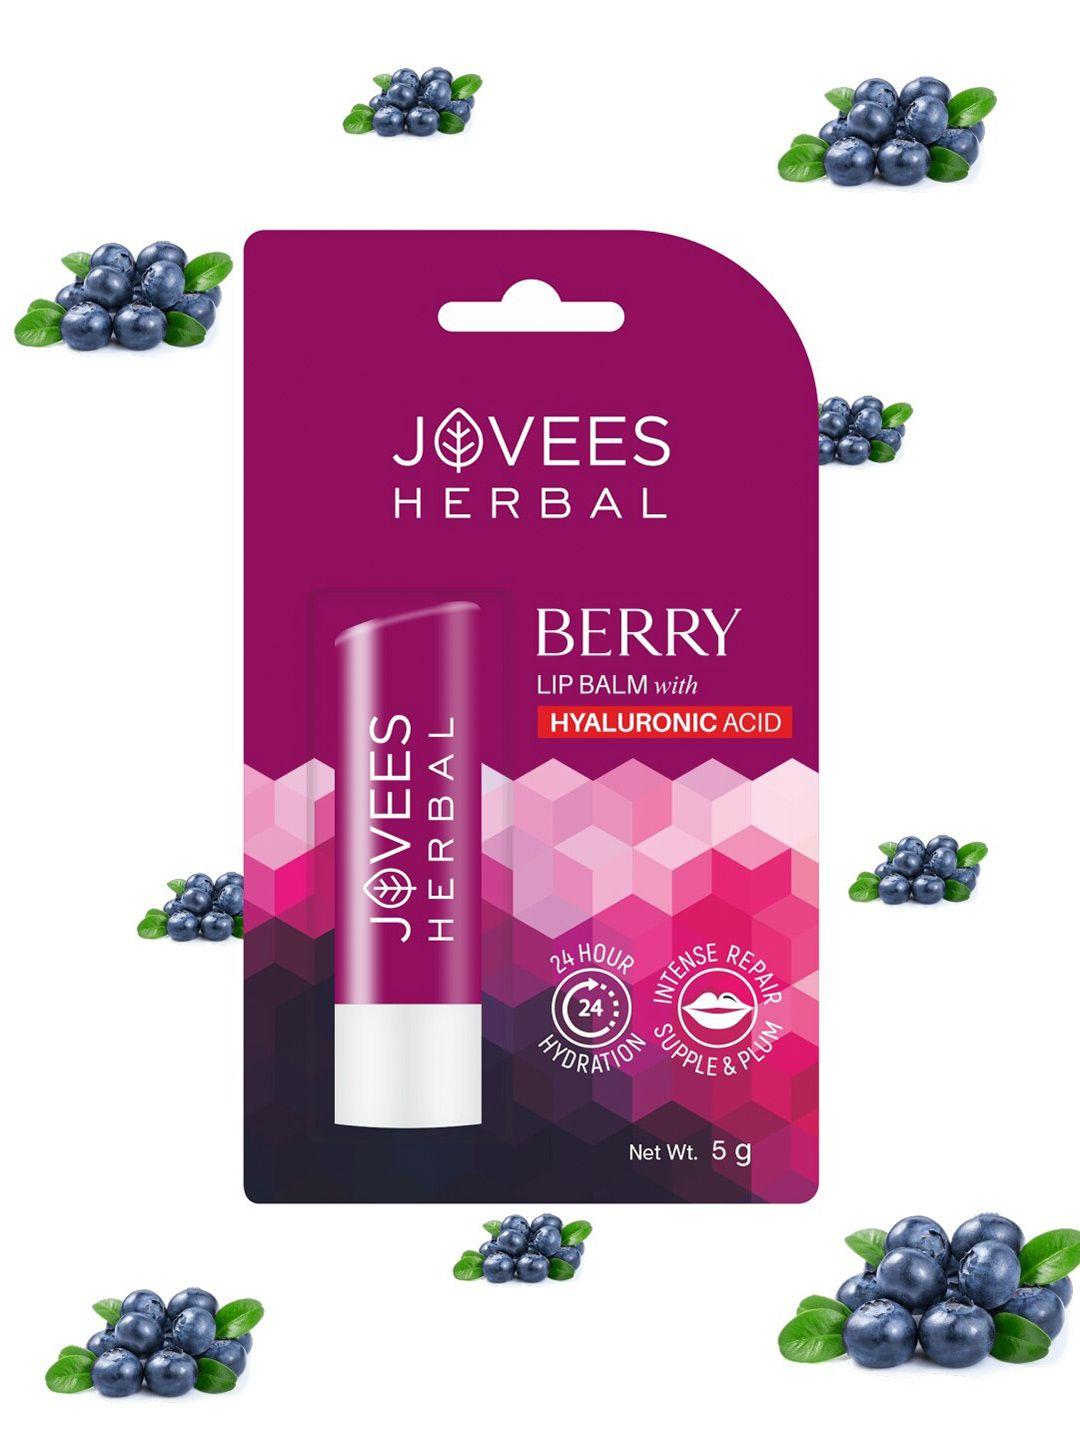 jovees herbal berry balm with hyaluronic acid-5 g